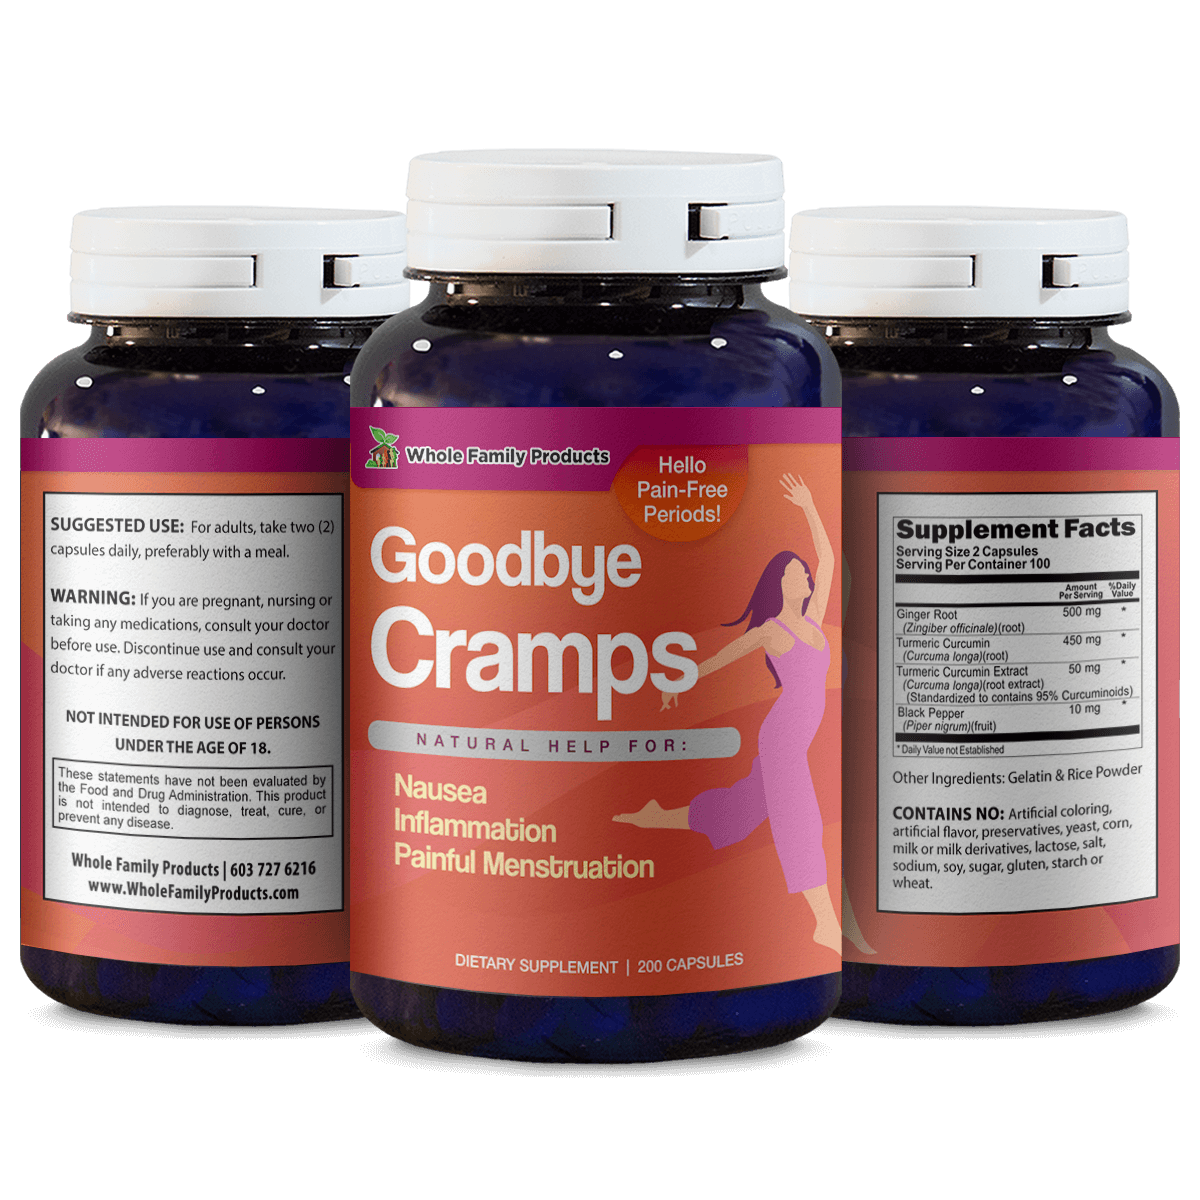 Goodbye Cramps Natural Help for Nausea and Inflammation